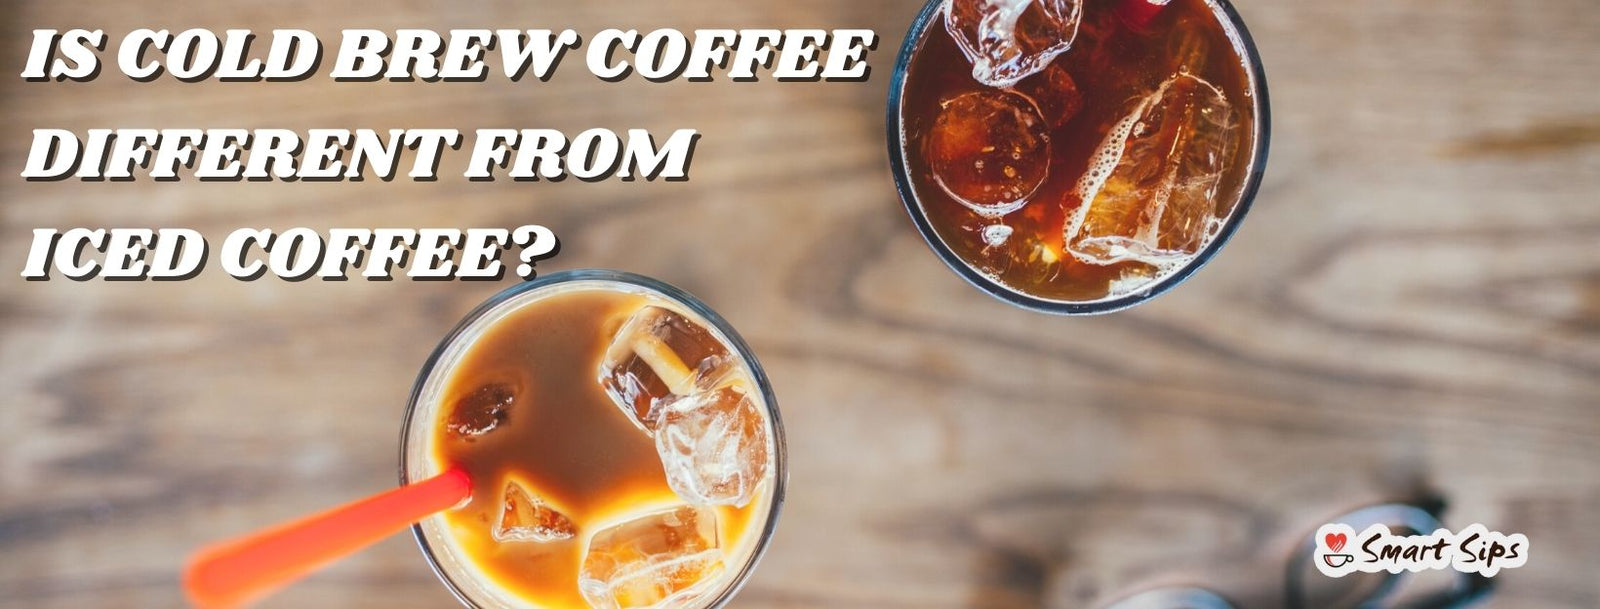 Is Cold Brew Coffee Different From Iced Coffee?